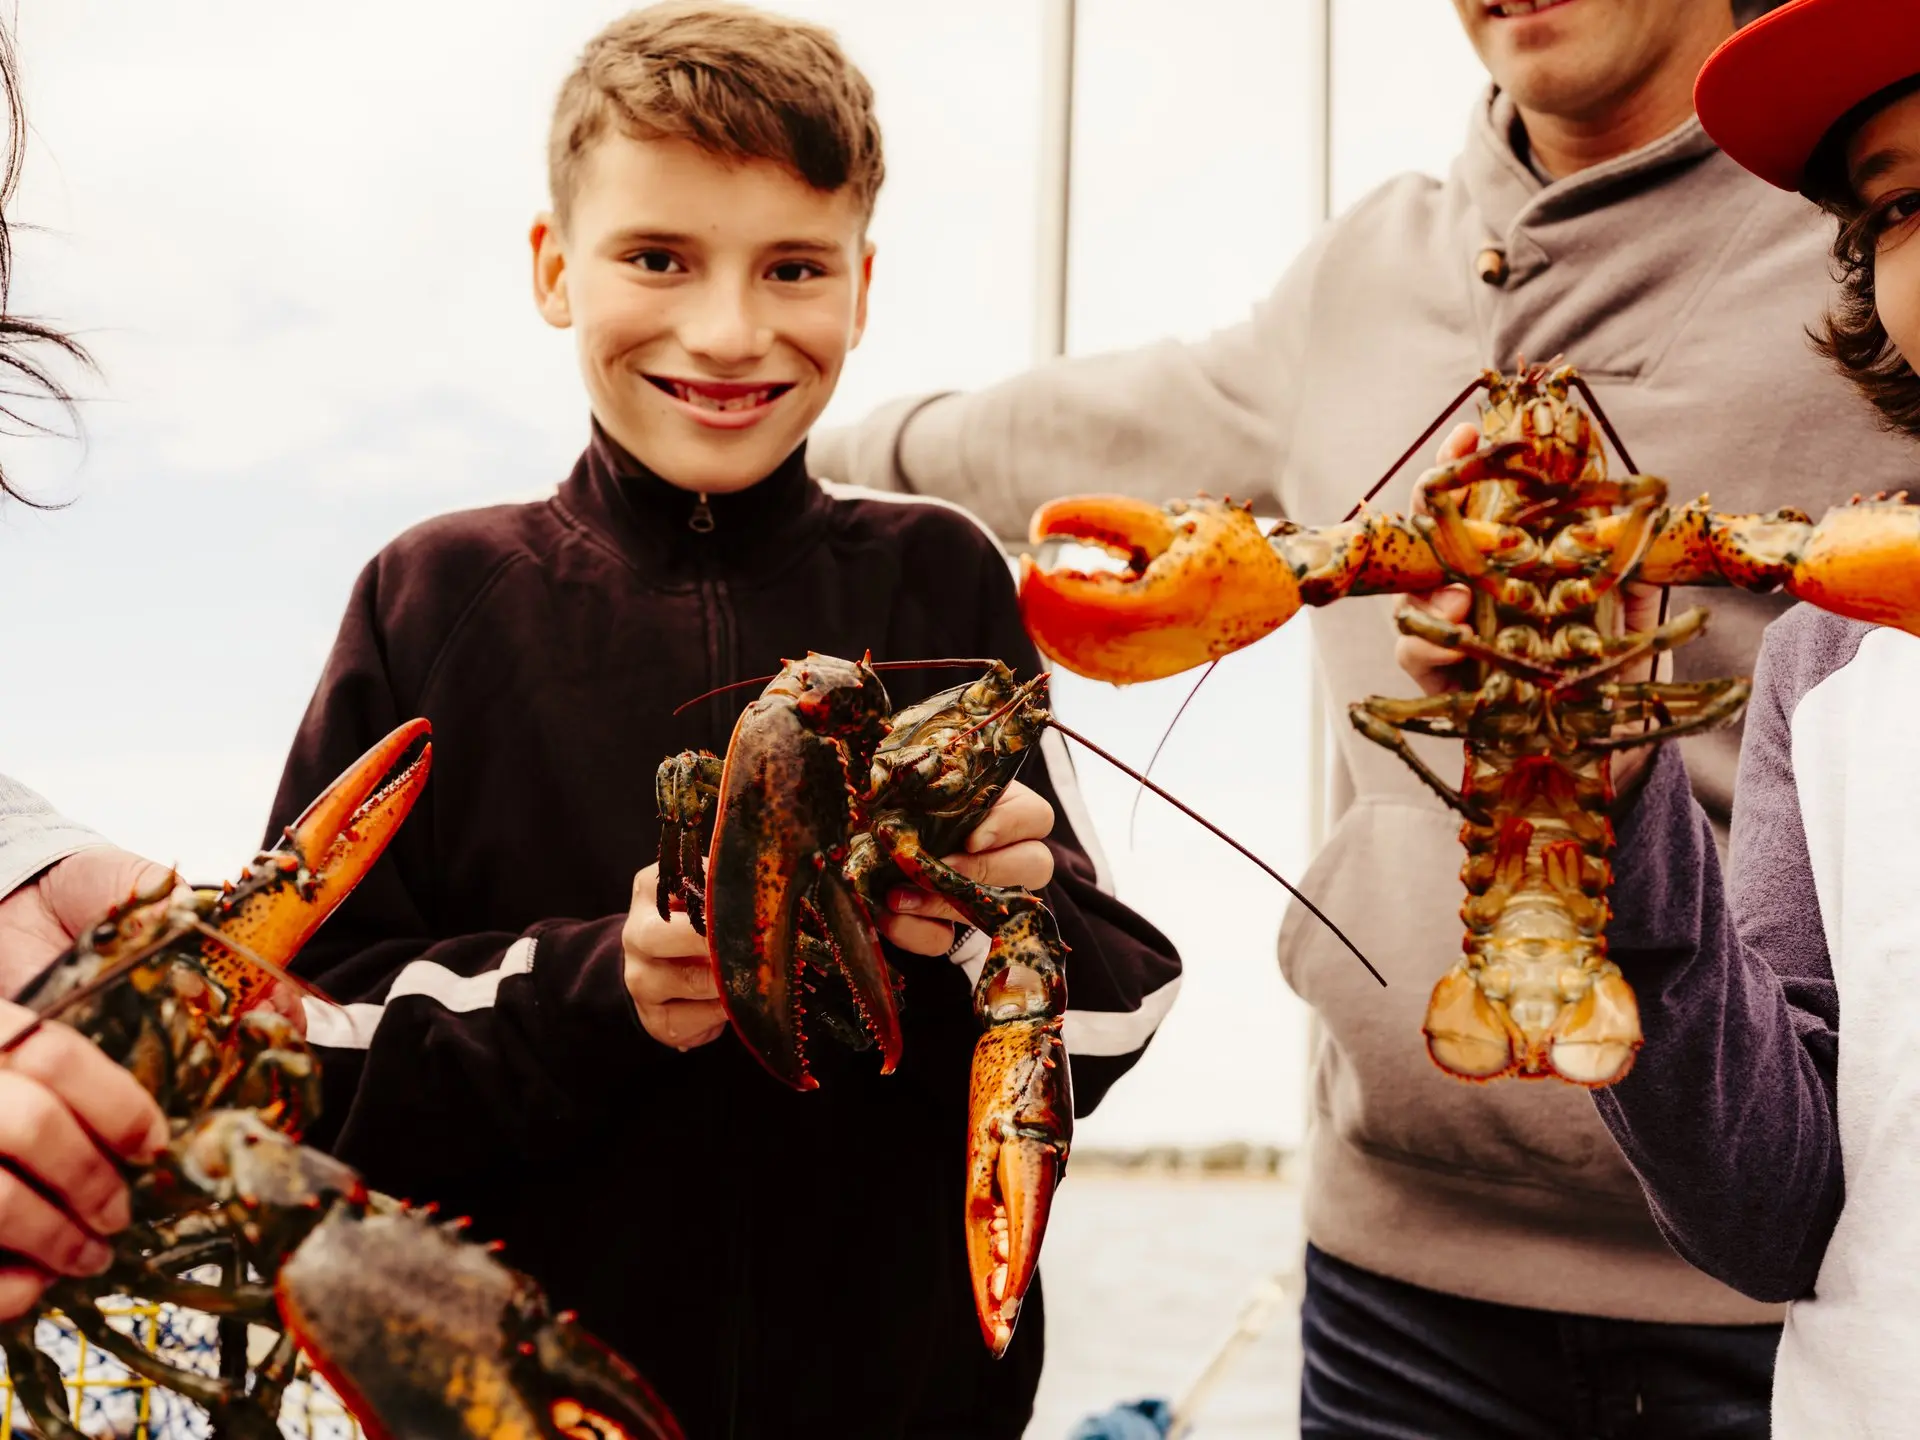 Lobster trapping off Tranquility Cove in historic Georgetown - credit: Destination Canada